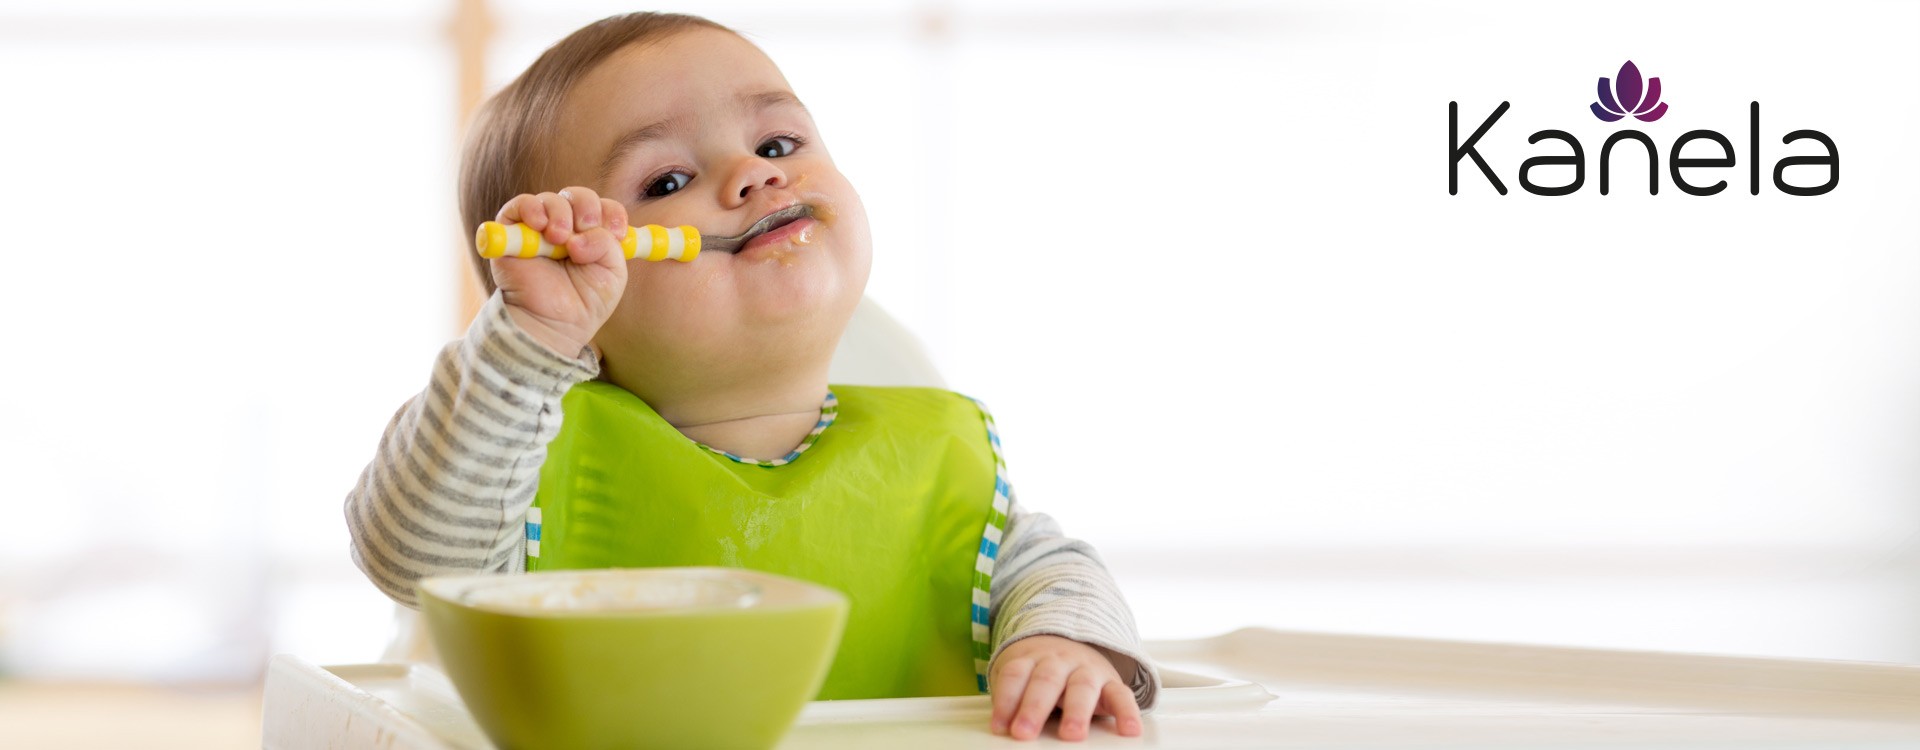 WHAT IS THE RIGHT NUTRITION FOR YOUR BABY?